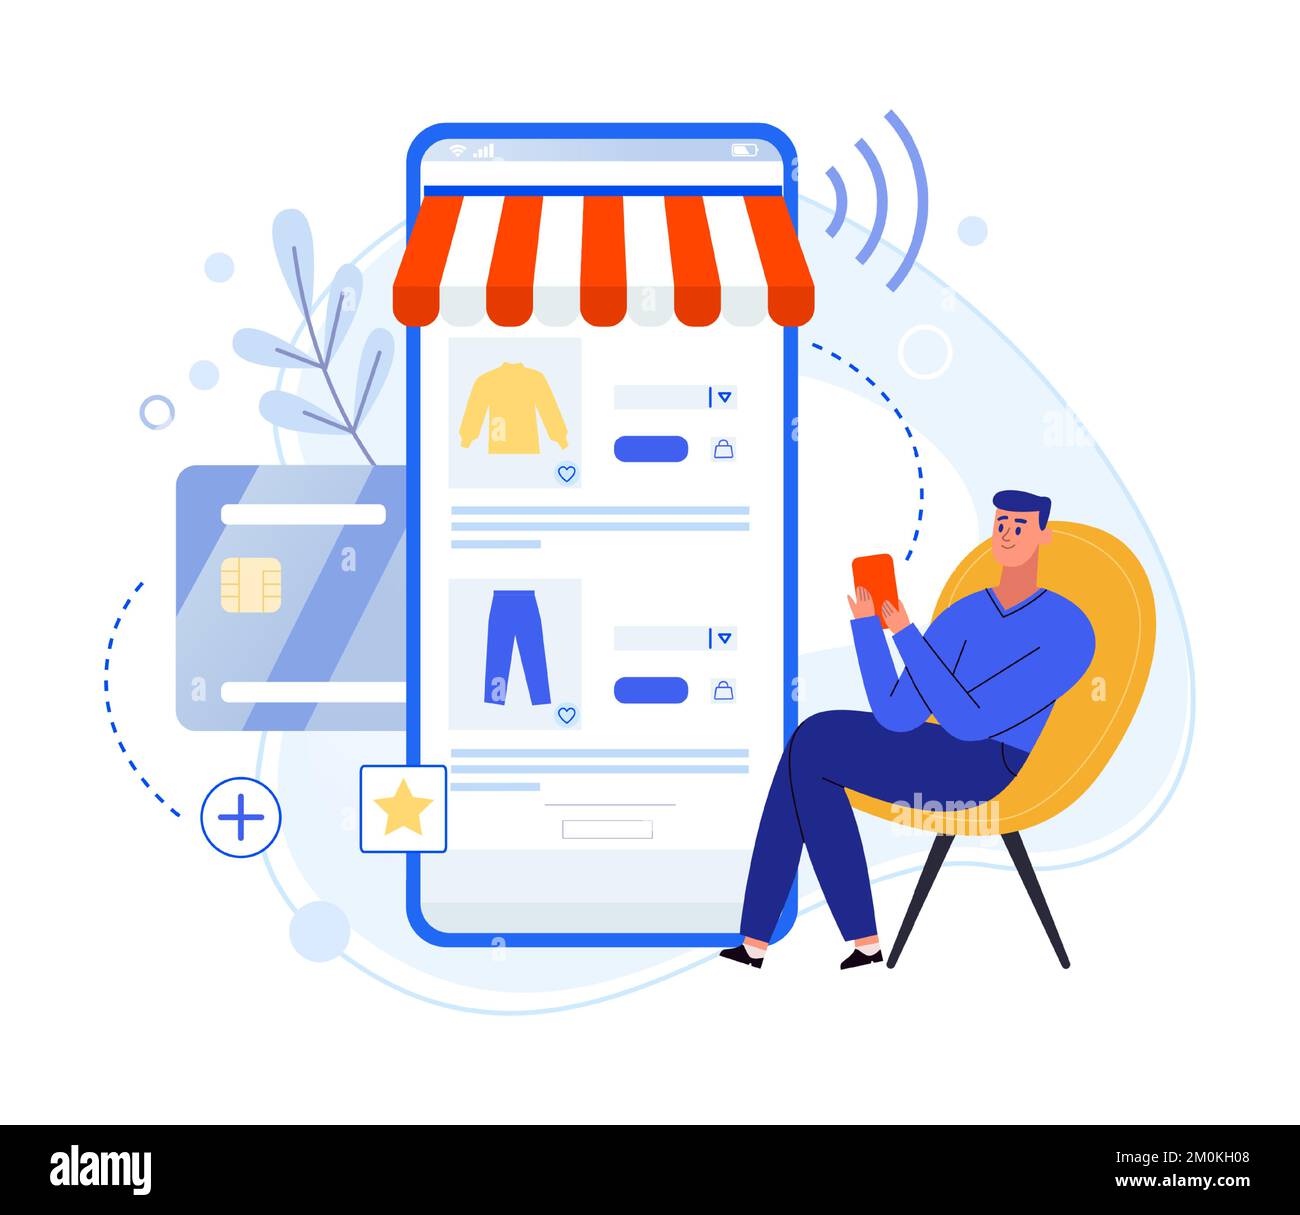 Online shopping app. Man sitting on chair and buying clothes in smartphone, paying with credit card, Male character Stock Vector